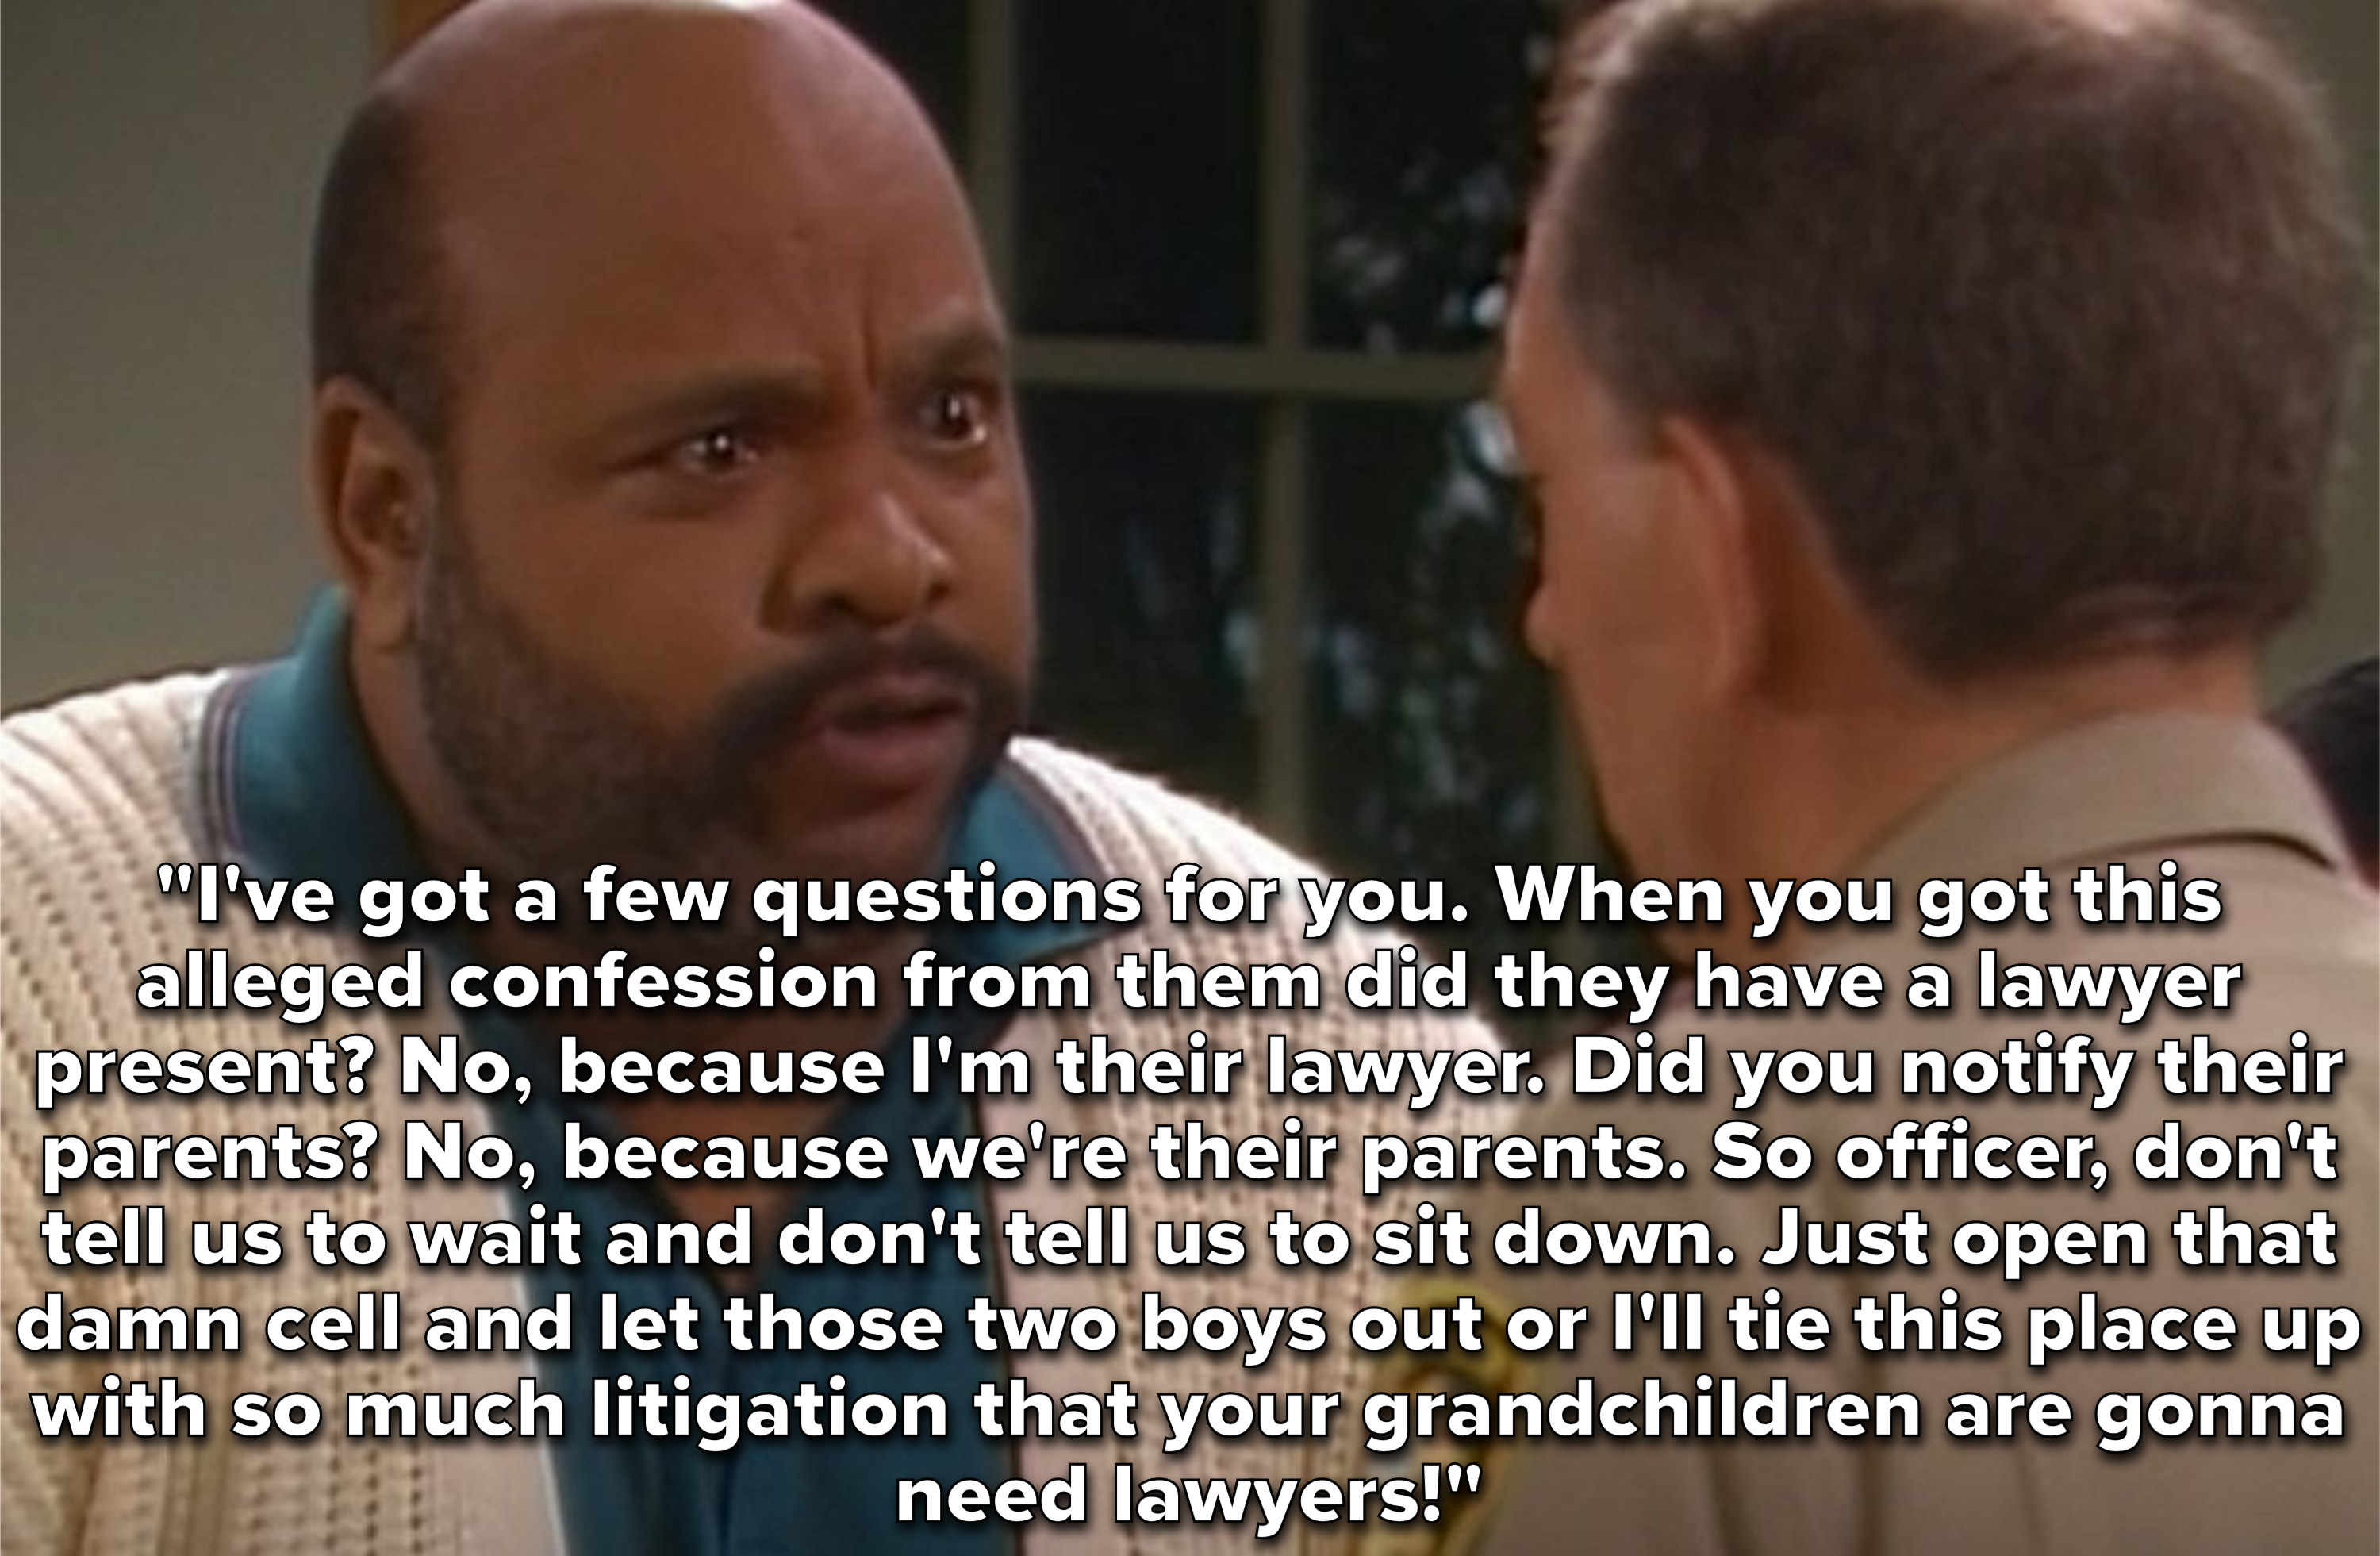 Uncle Phil threatens to bury the police in litigation